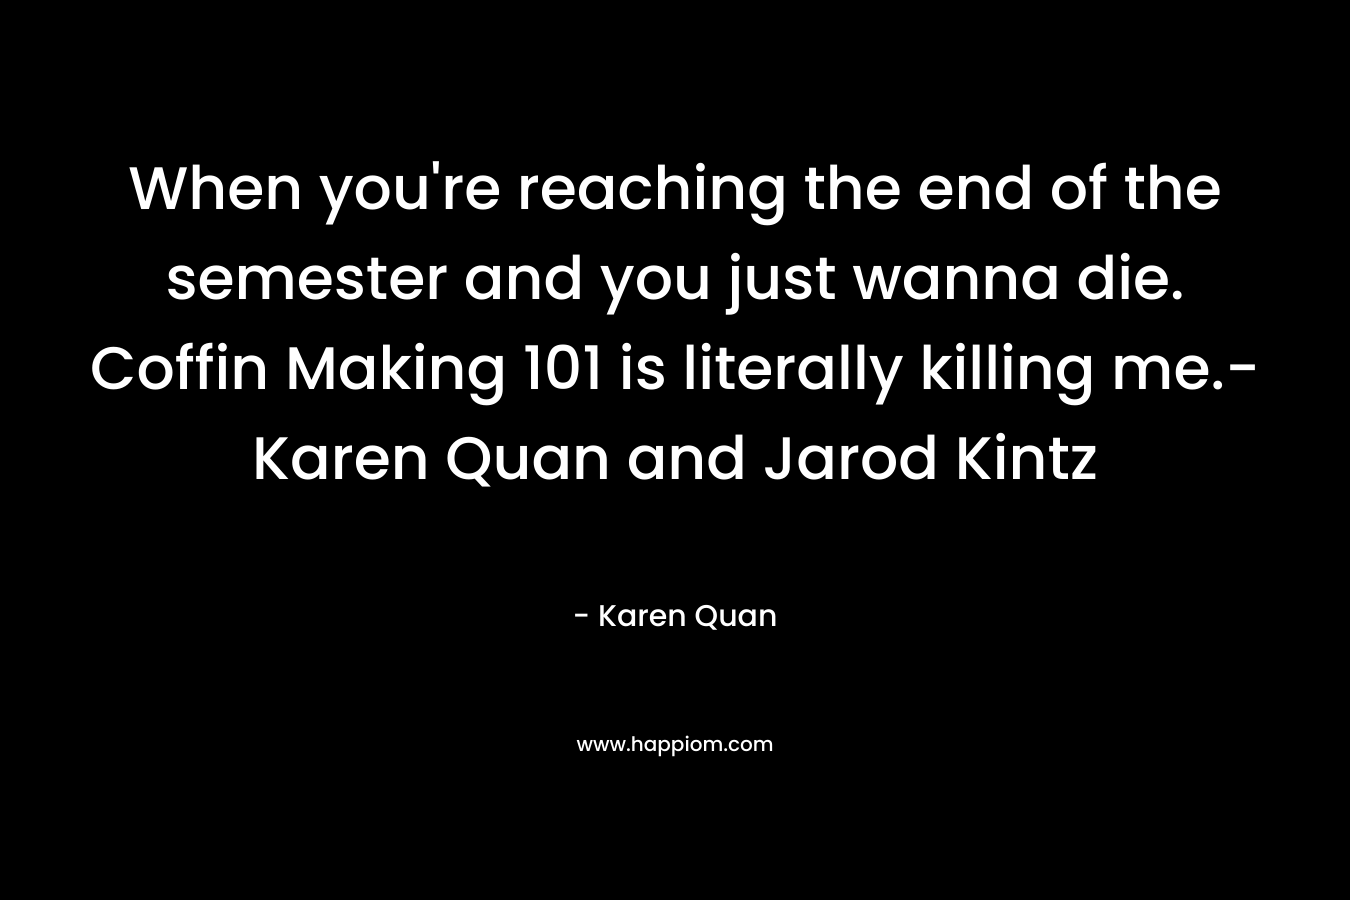 When you're reaching the end of the semester and you just wanna die. Coffin Making 101 is literally killing me.-Karen Quan and Jarod Kintz